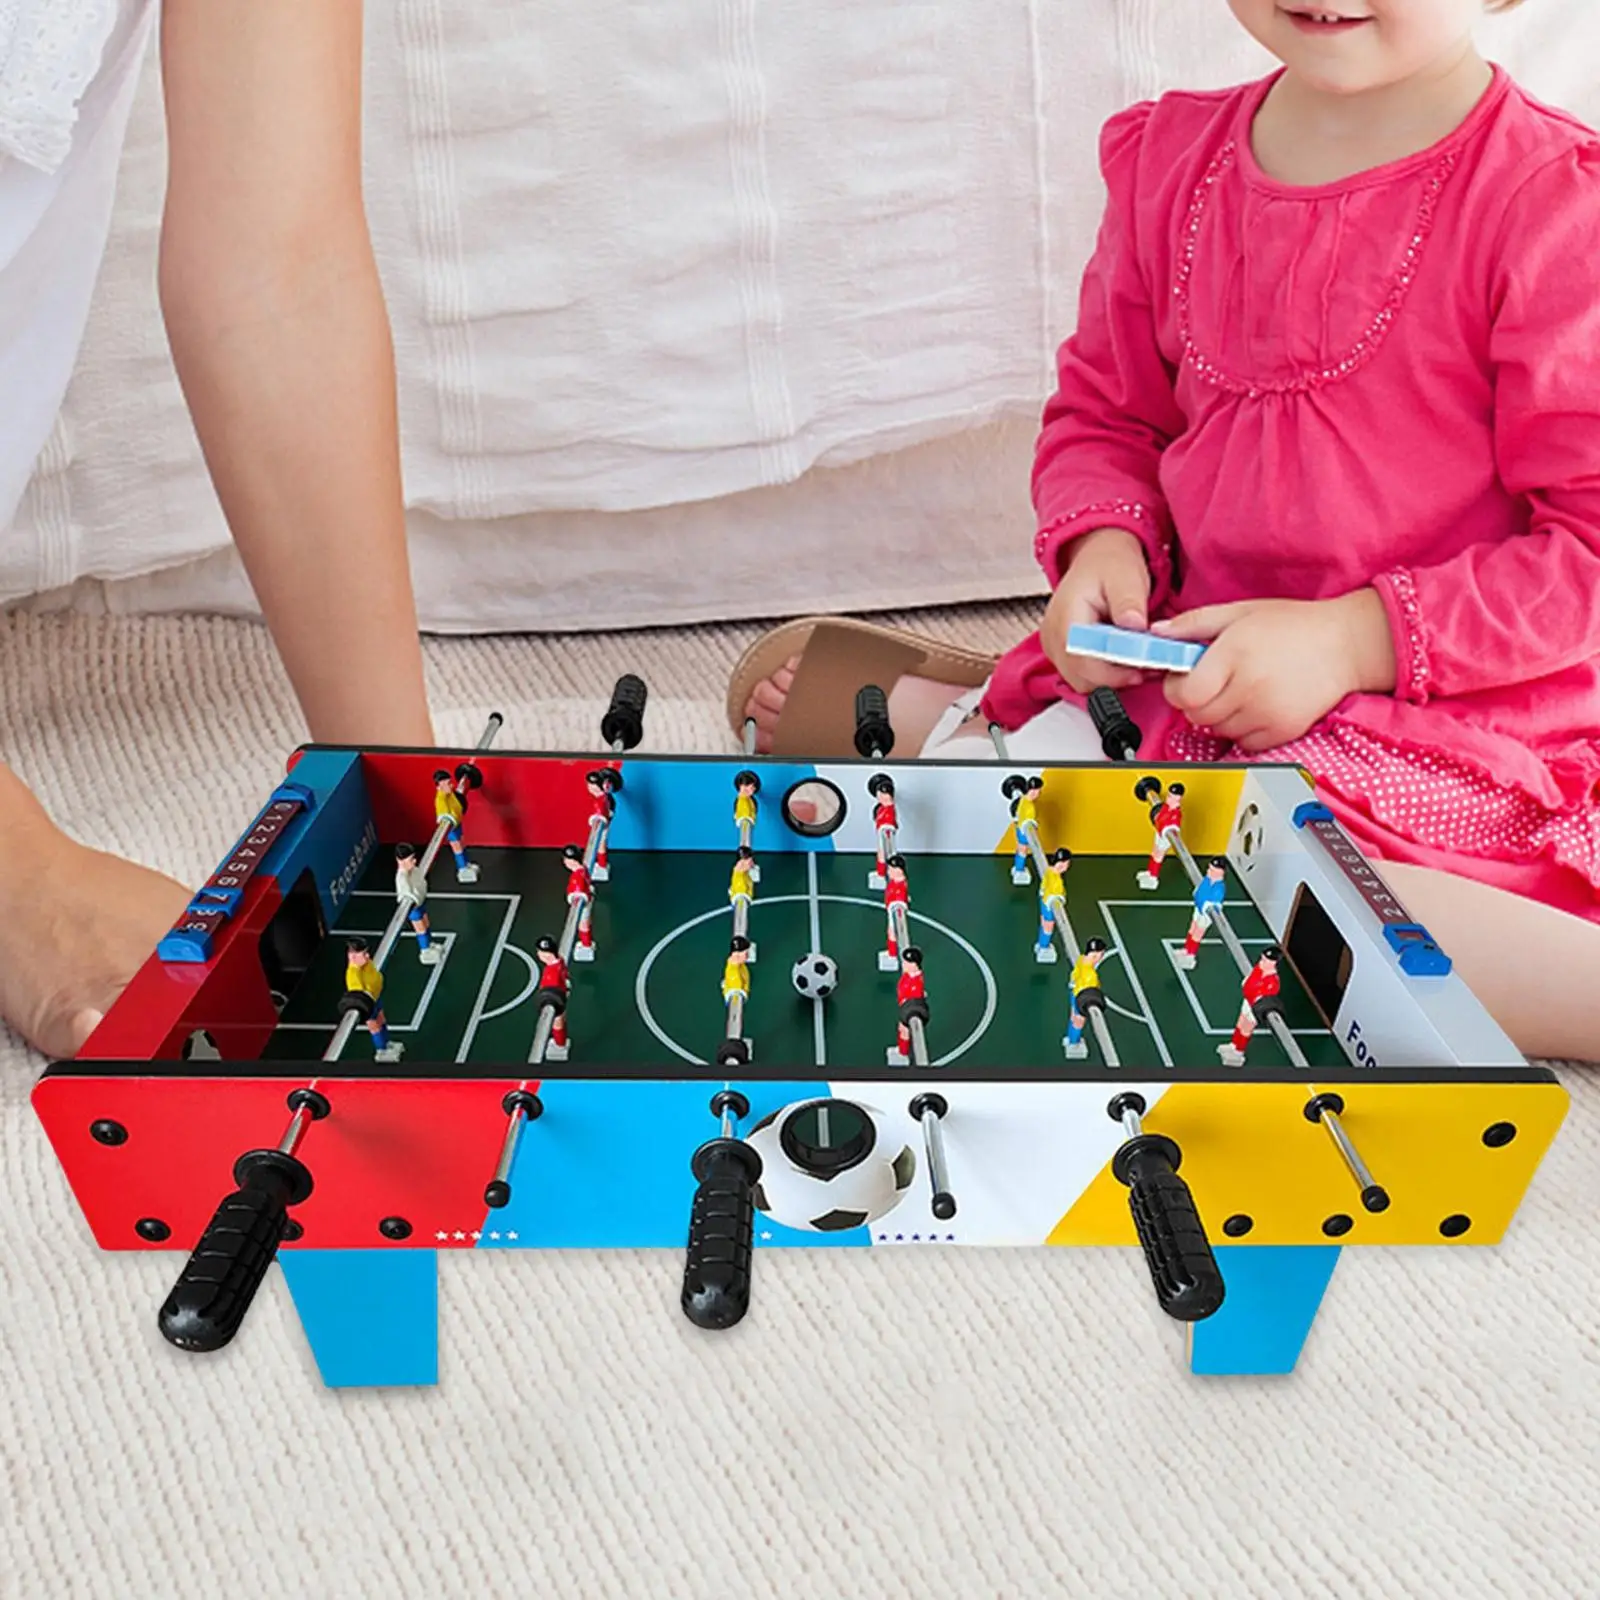 Portable Foosball Table Easy to Store Educational Toys Interactive Tabletop Football Games for Game Rooms Holiday Gifts Children